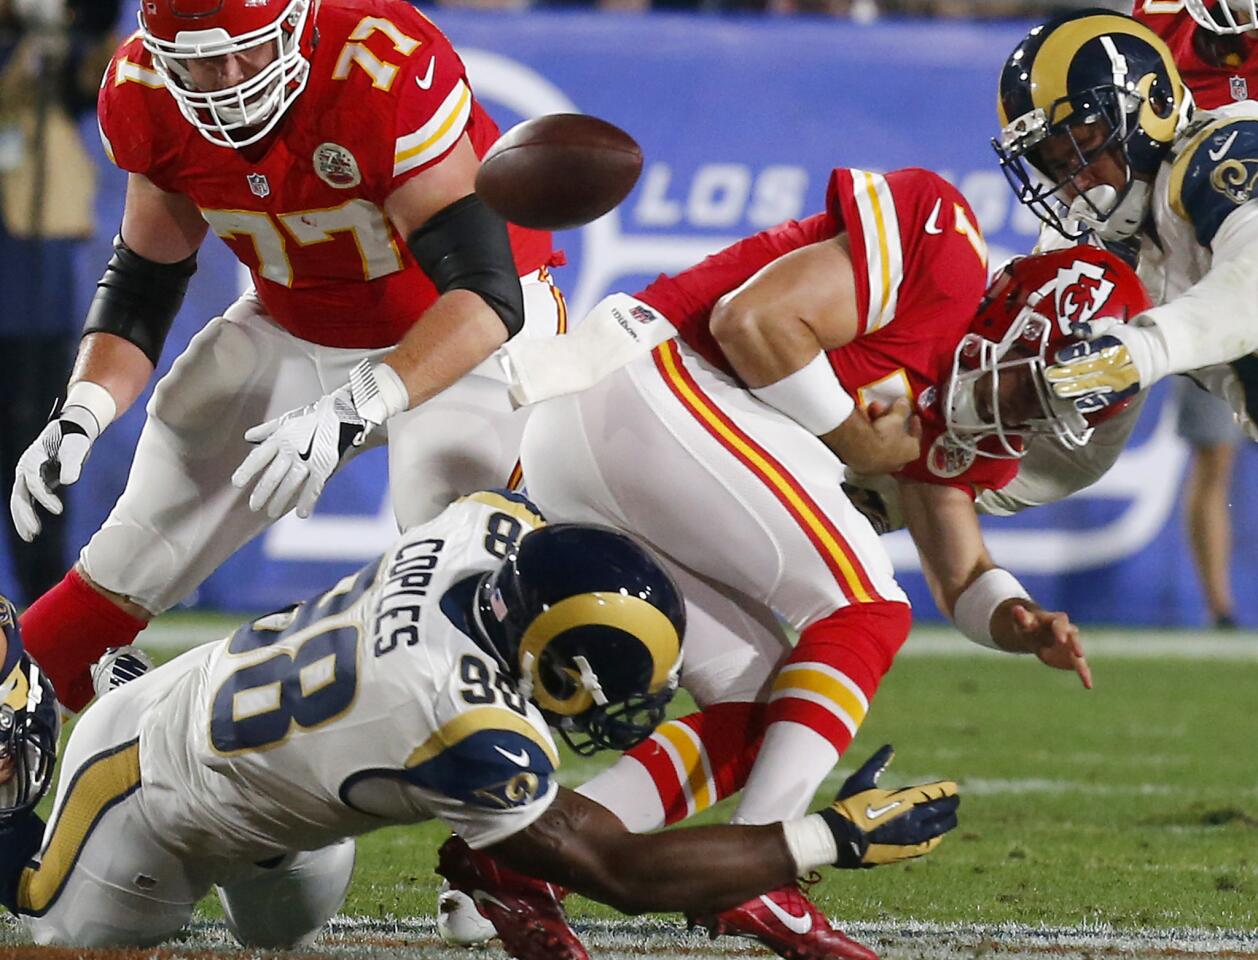 LOS ANGELES, CALIF. - AUG. 20, 2016. The Rams defense forces a fumble by Chiefs quarterback Aaron Murray in the fourth quarter on a game at the Coliseum on Aug. 20.